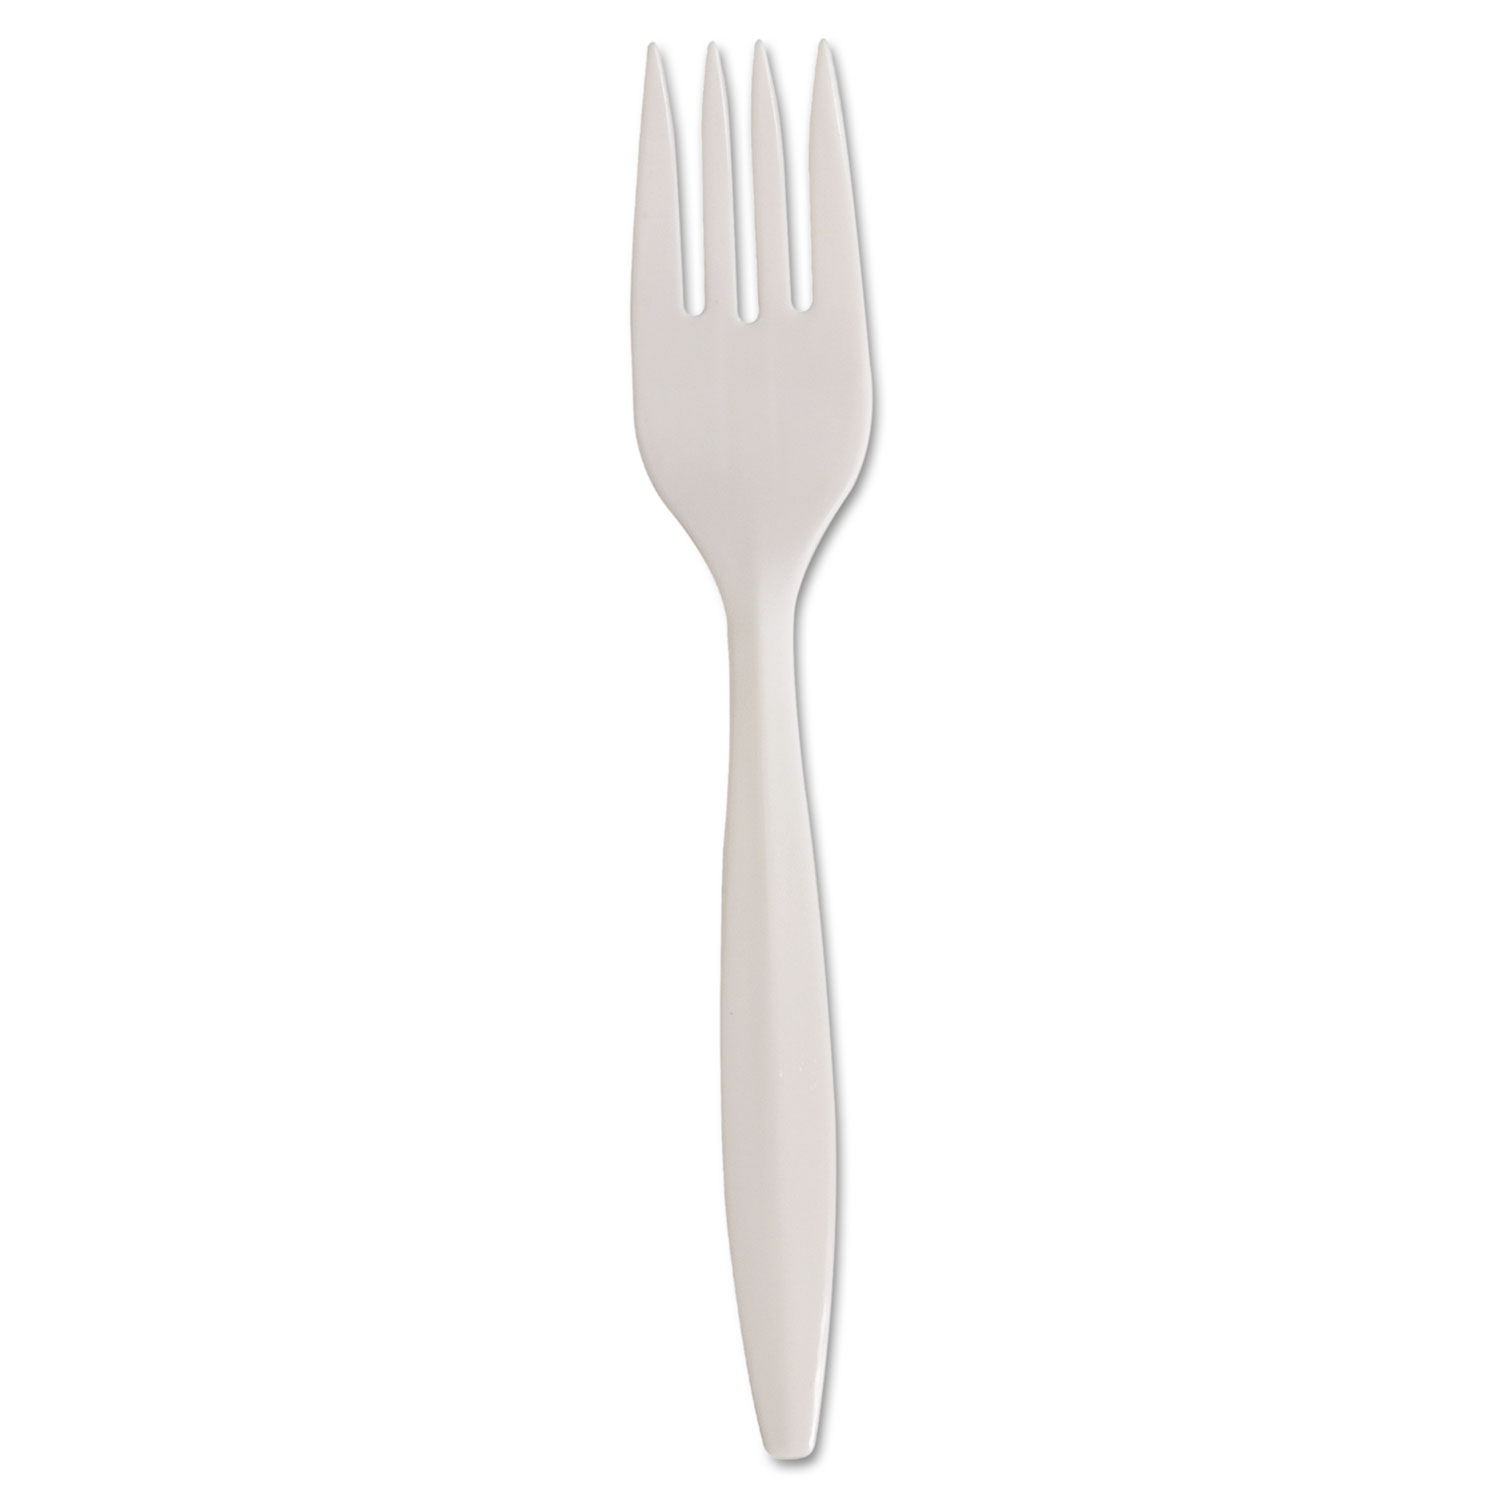 Mediumweight Polypropylene Cutlery, Forks, White, Ind. Wrapped, 1000/Carton